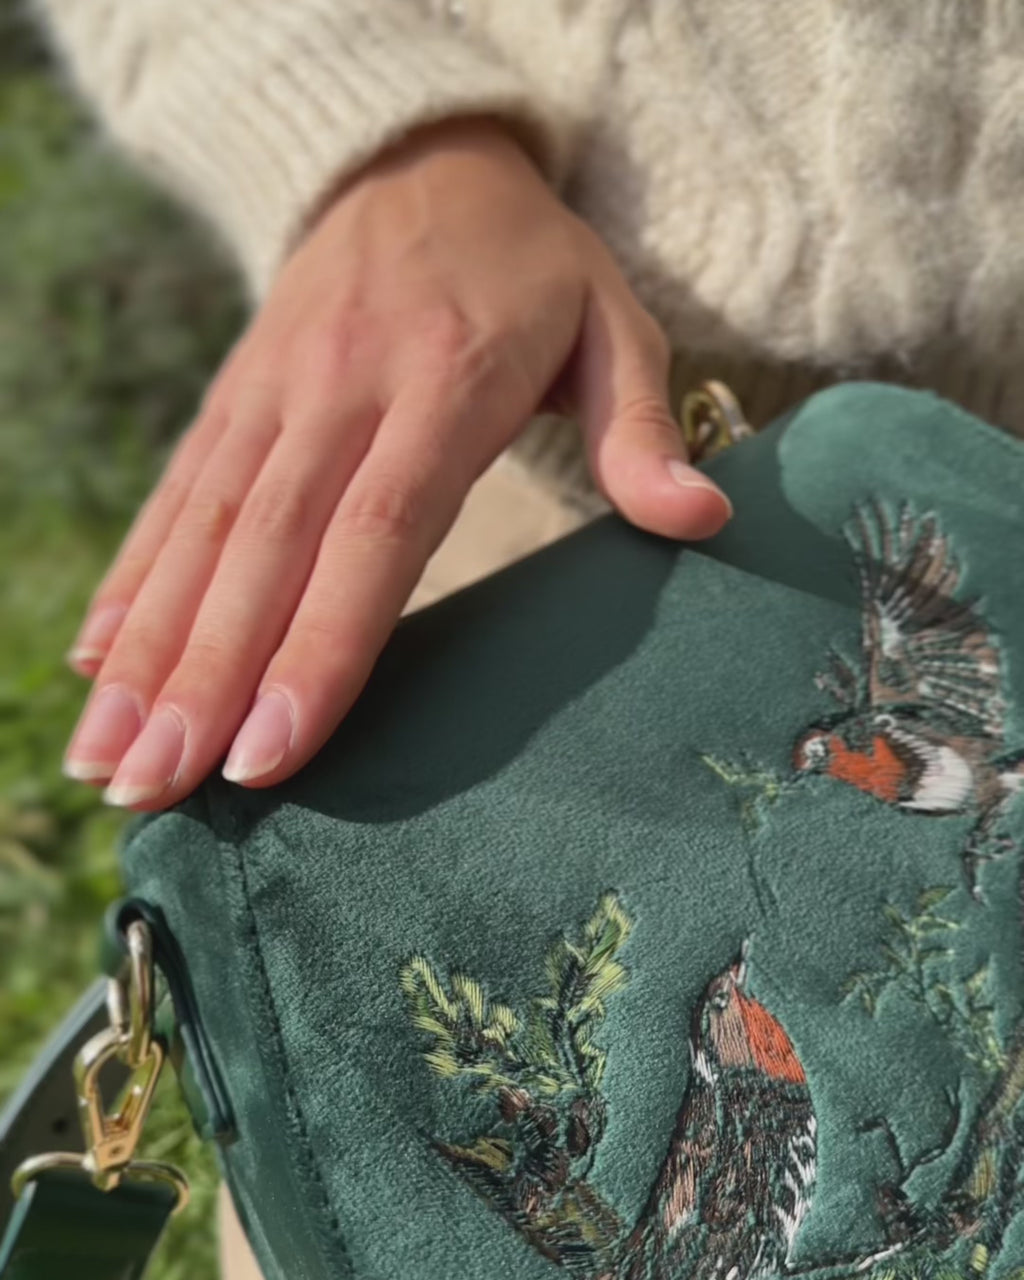 Fox & Mushroom Embroidered Saddle Bag - Redcurrant Velvet by Fable England